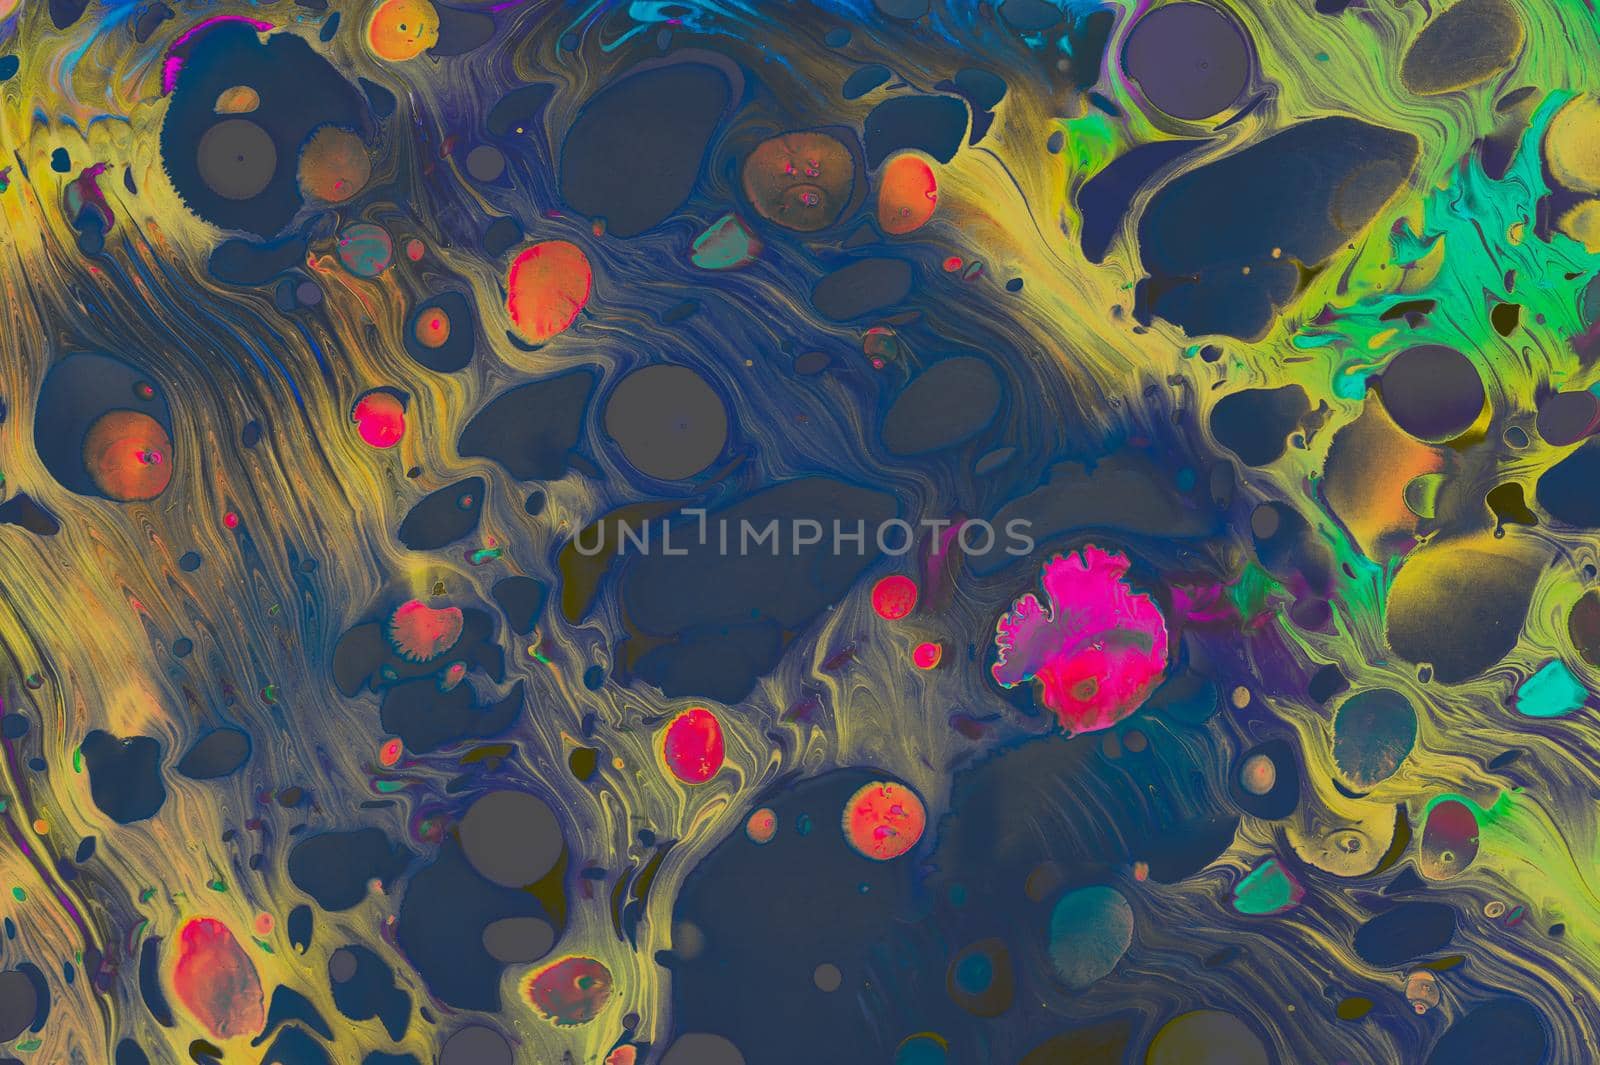 Abstract grunge art background texture with colorful paint splashes
 by berkay